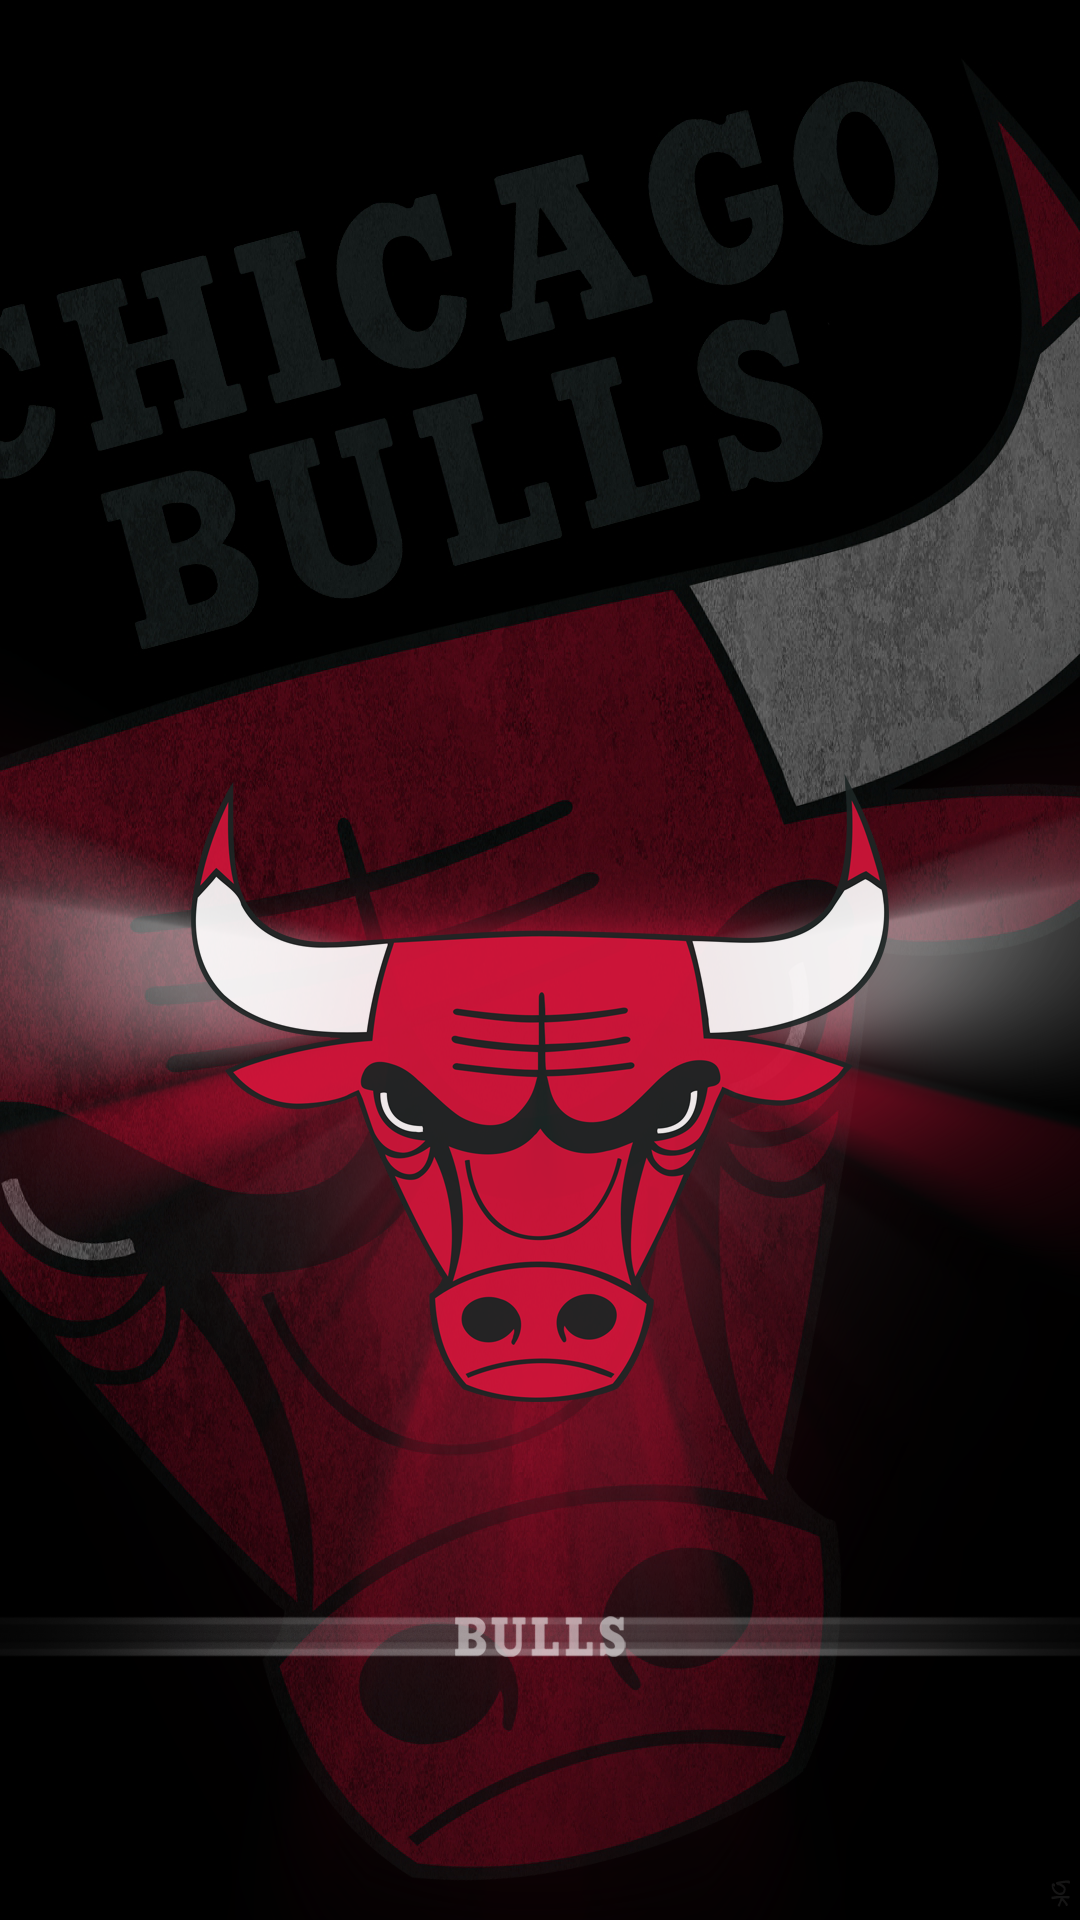 Chicago Bulls Iphone Wallpapers Free Download - Chicago Bulls Wallpaper Iphone , HD Wallpaper & Backgrounds